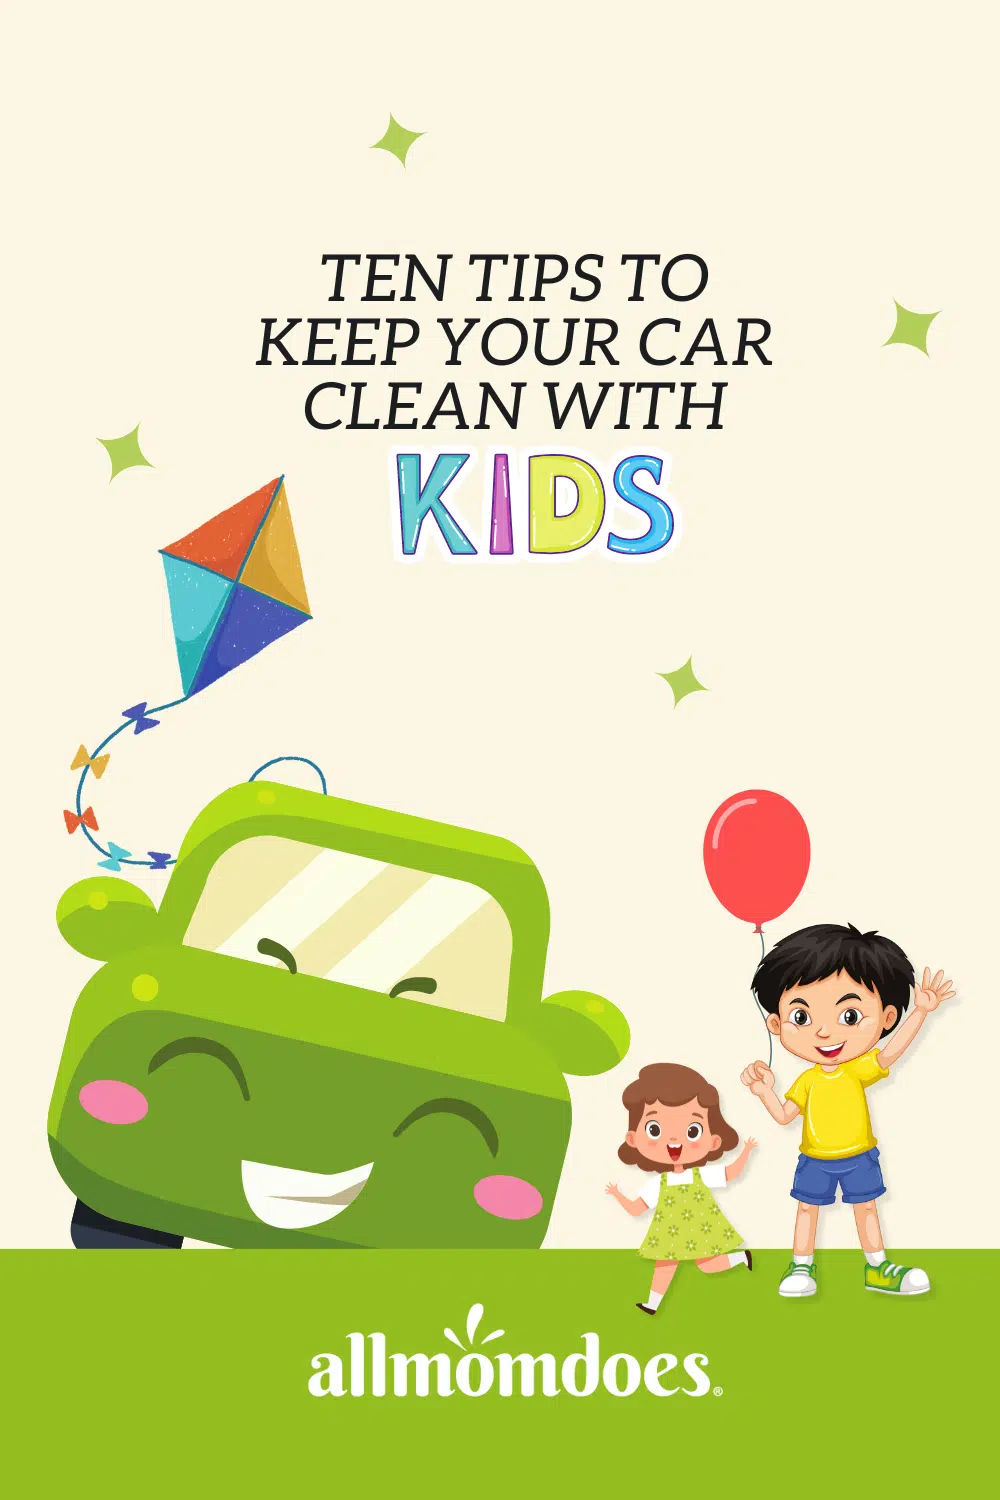 Ten Tips to Keep Your Car Clean with Kids